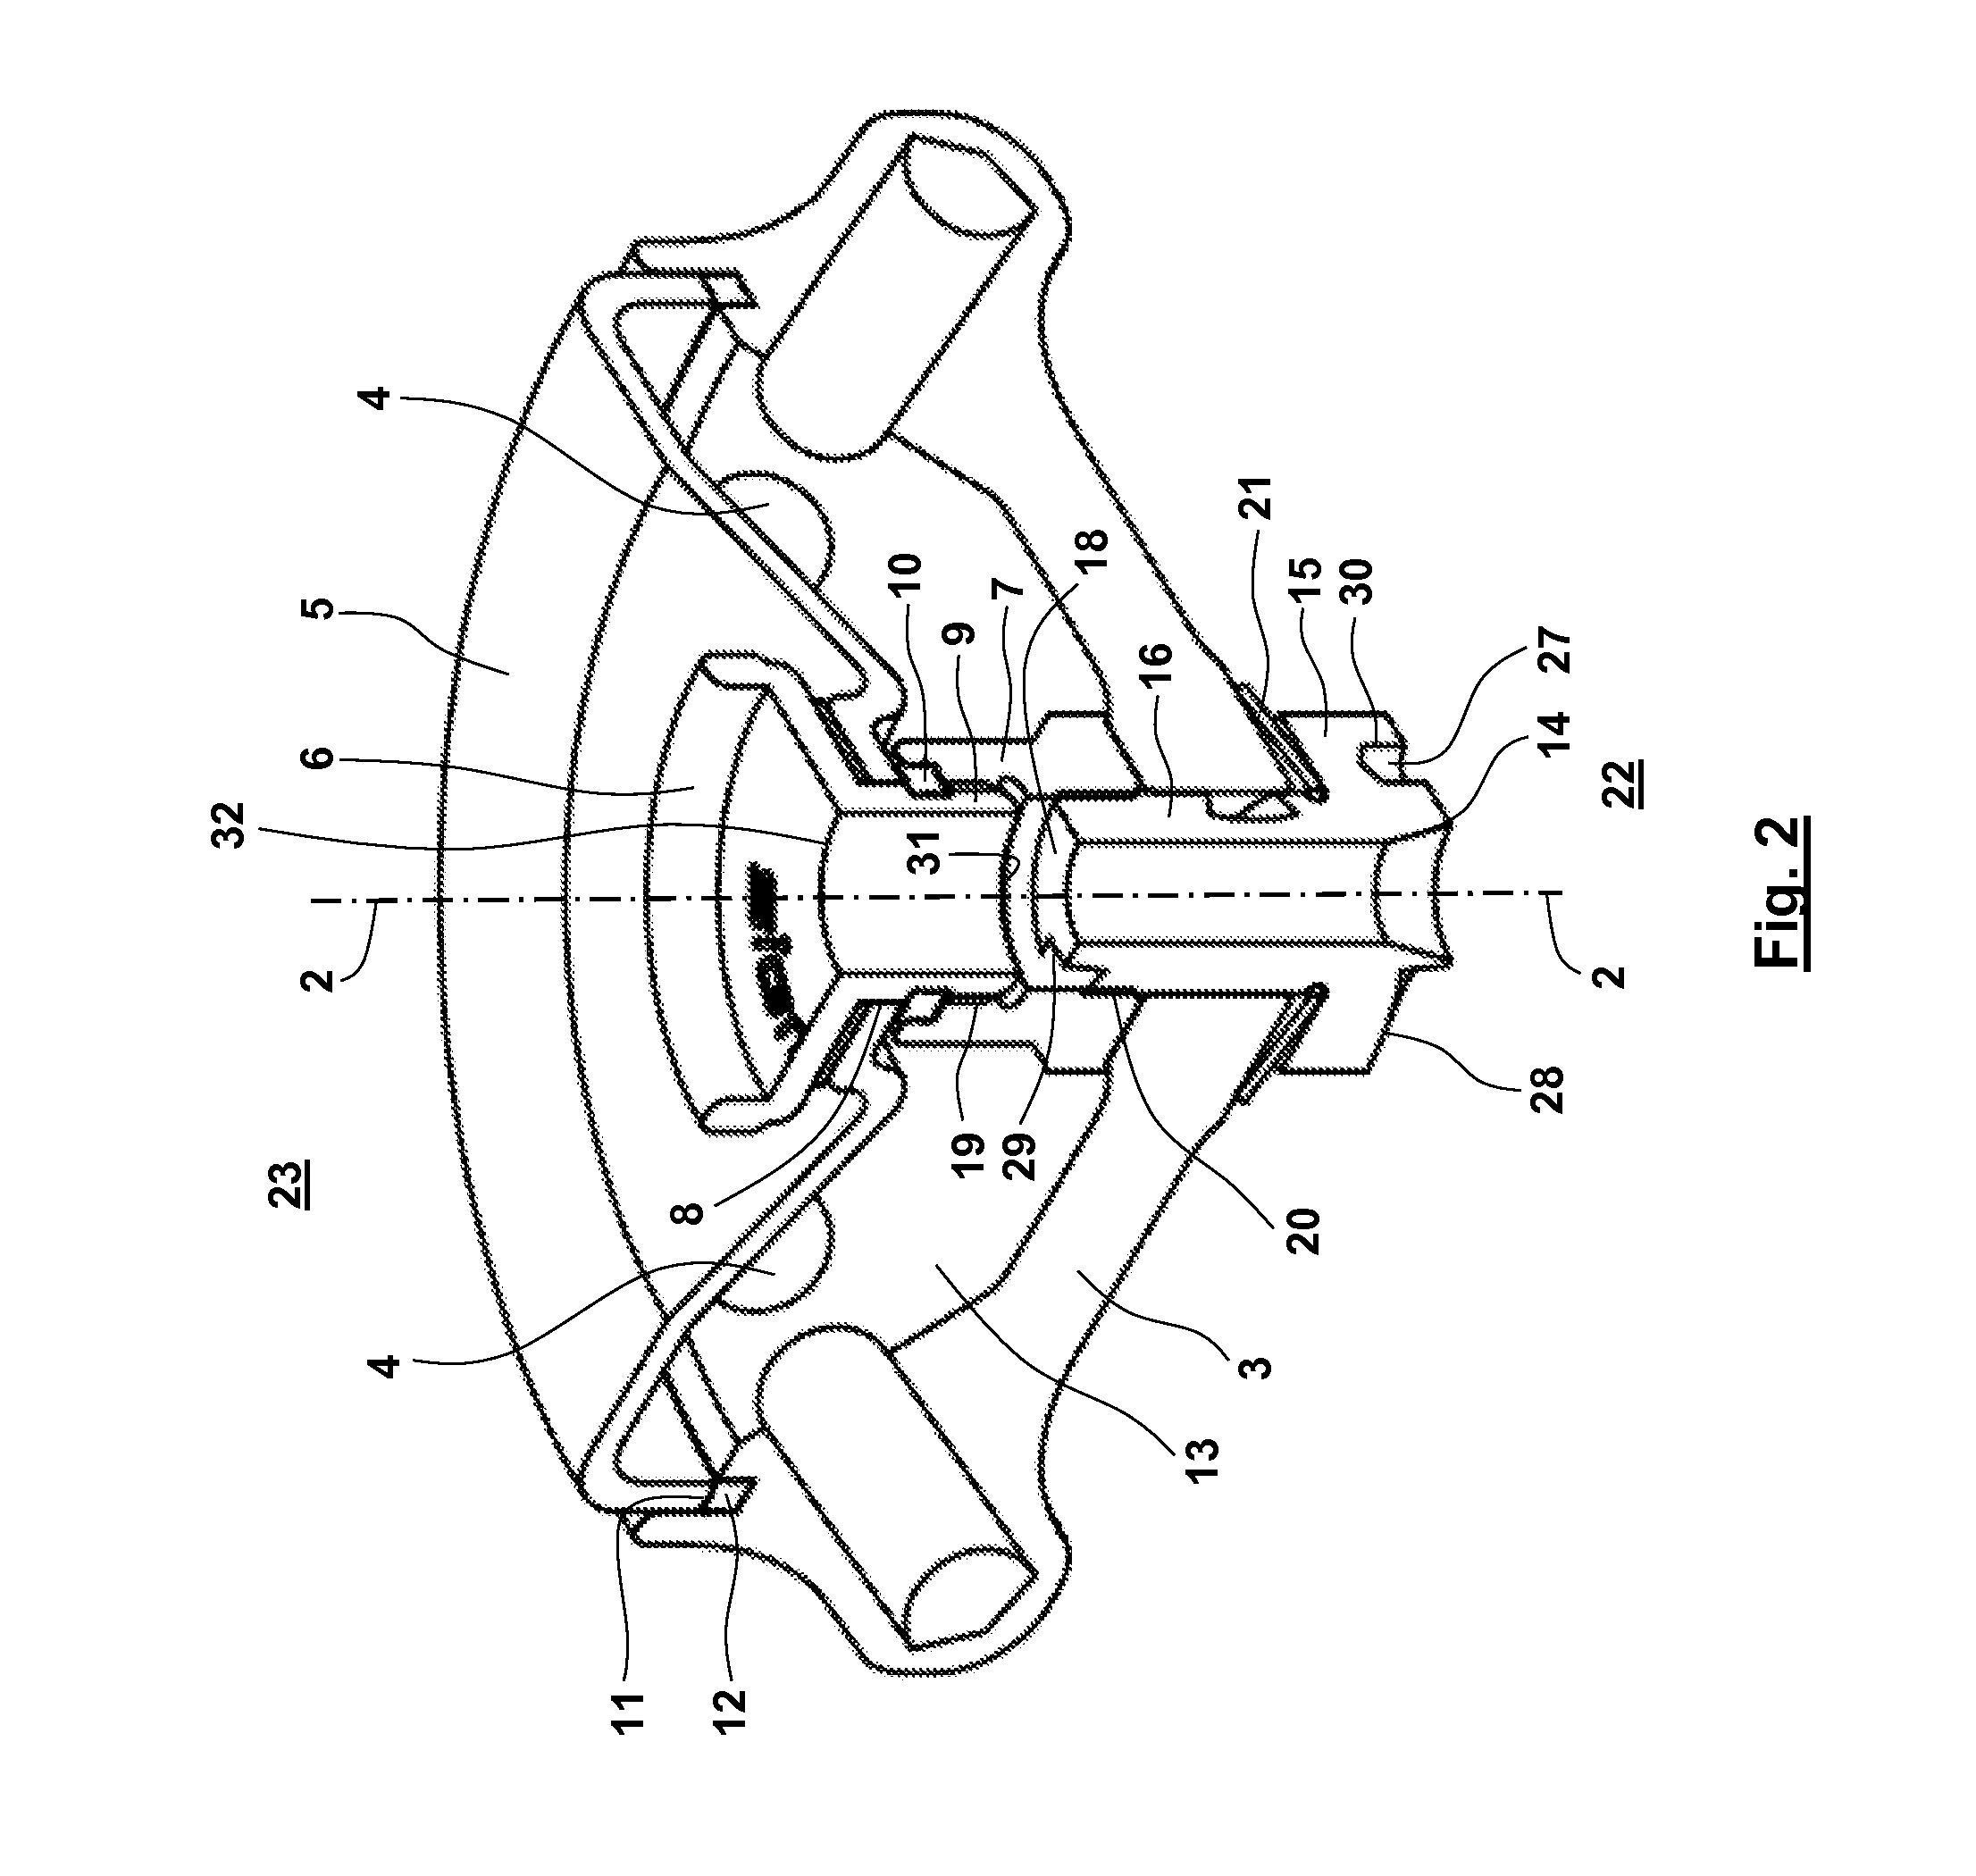 Rotor for a laboratory centrifuge with rotor hub cooling means